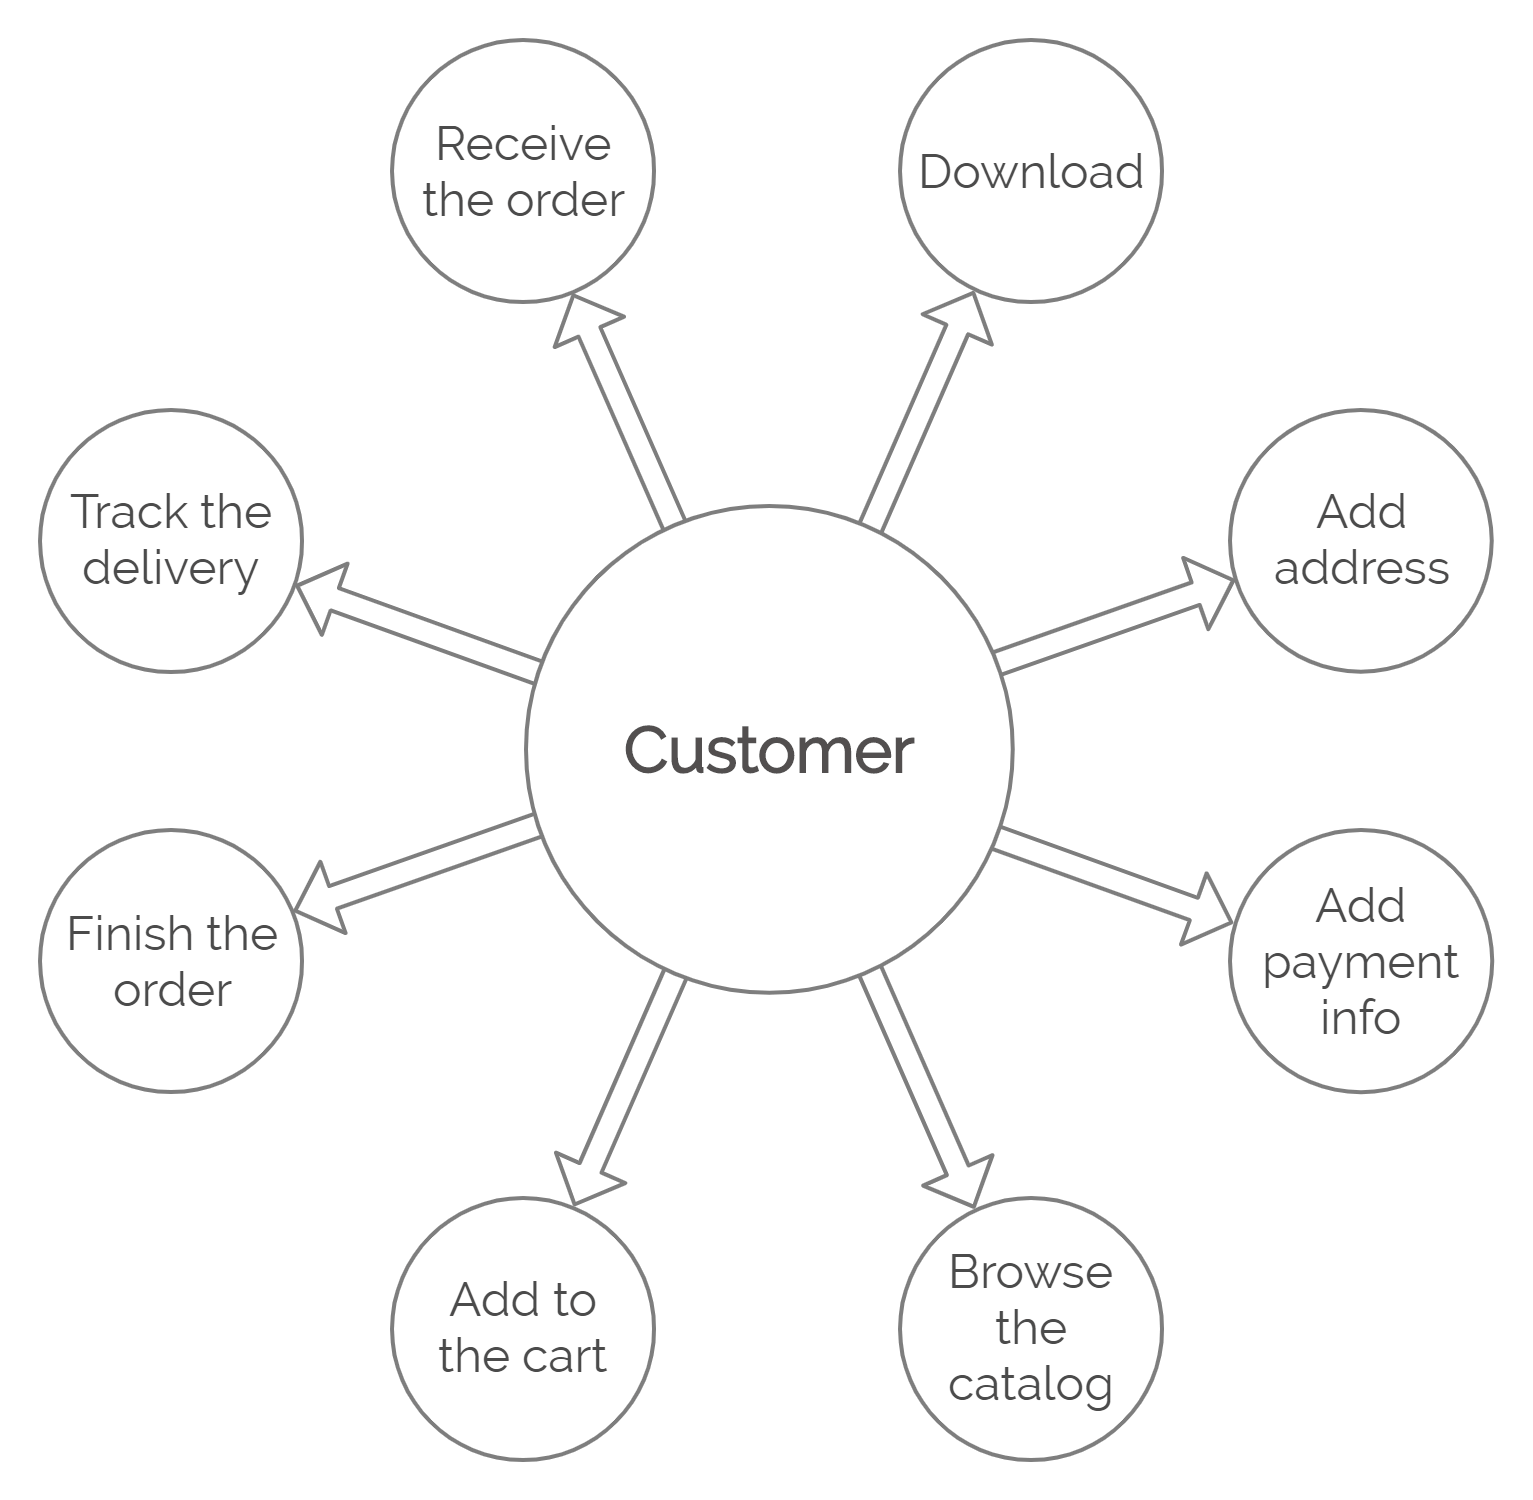 Customer's Actions